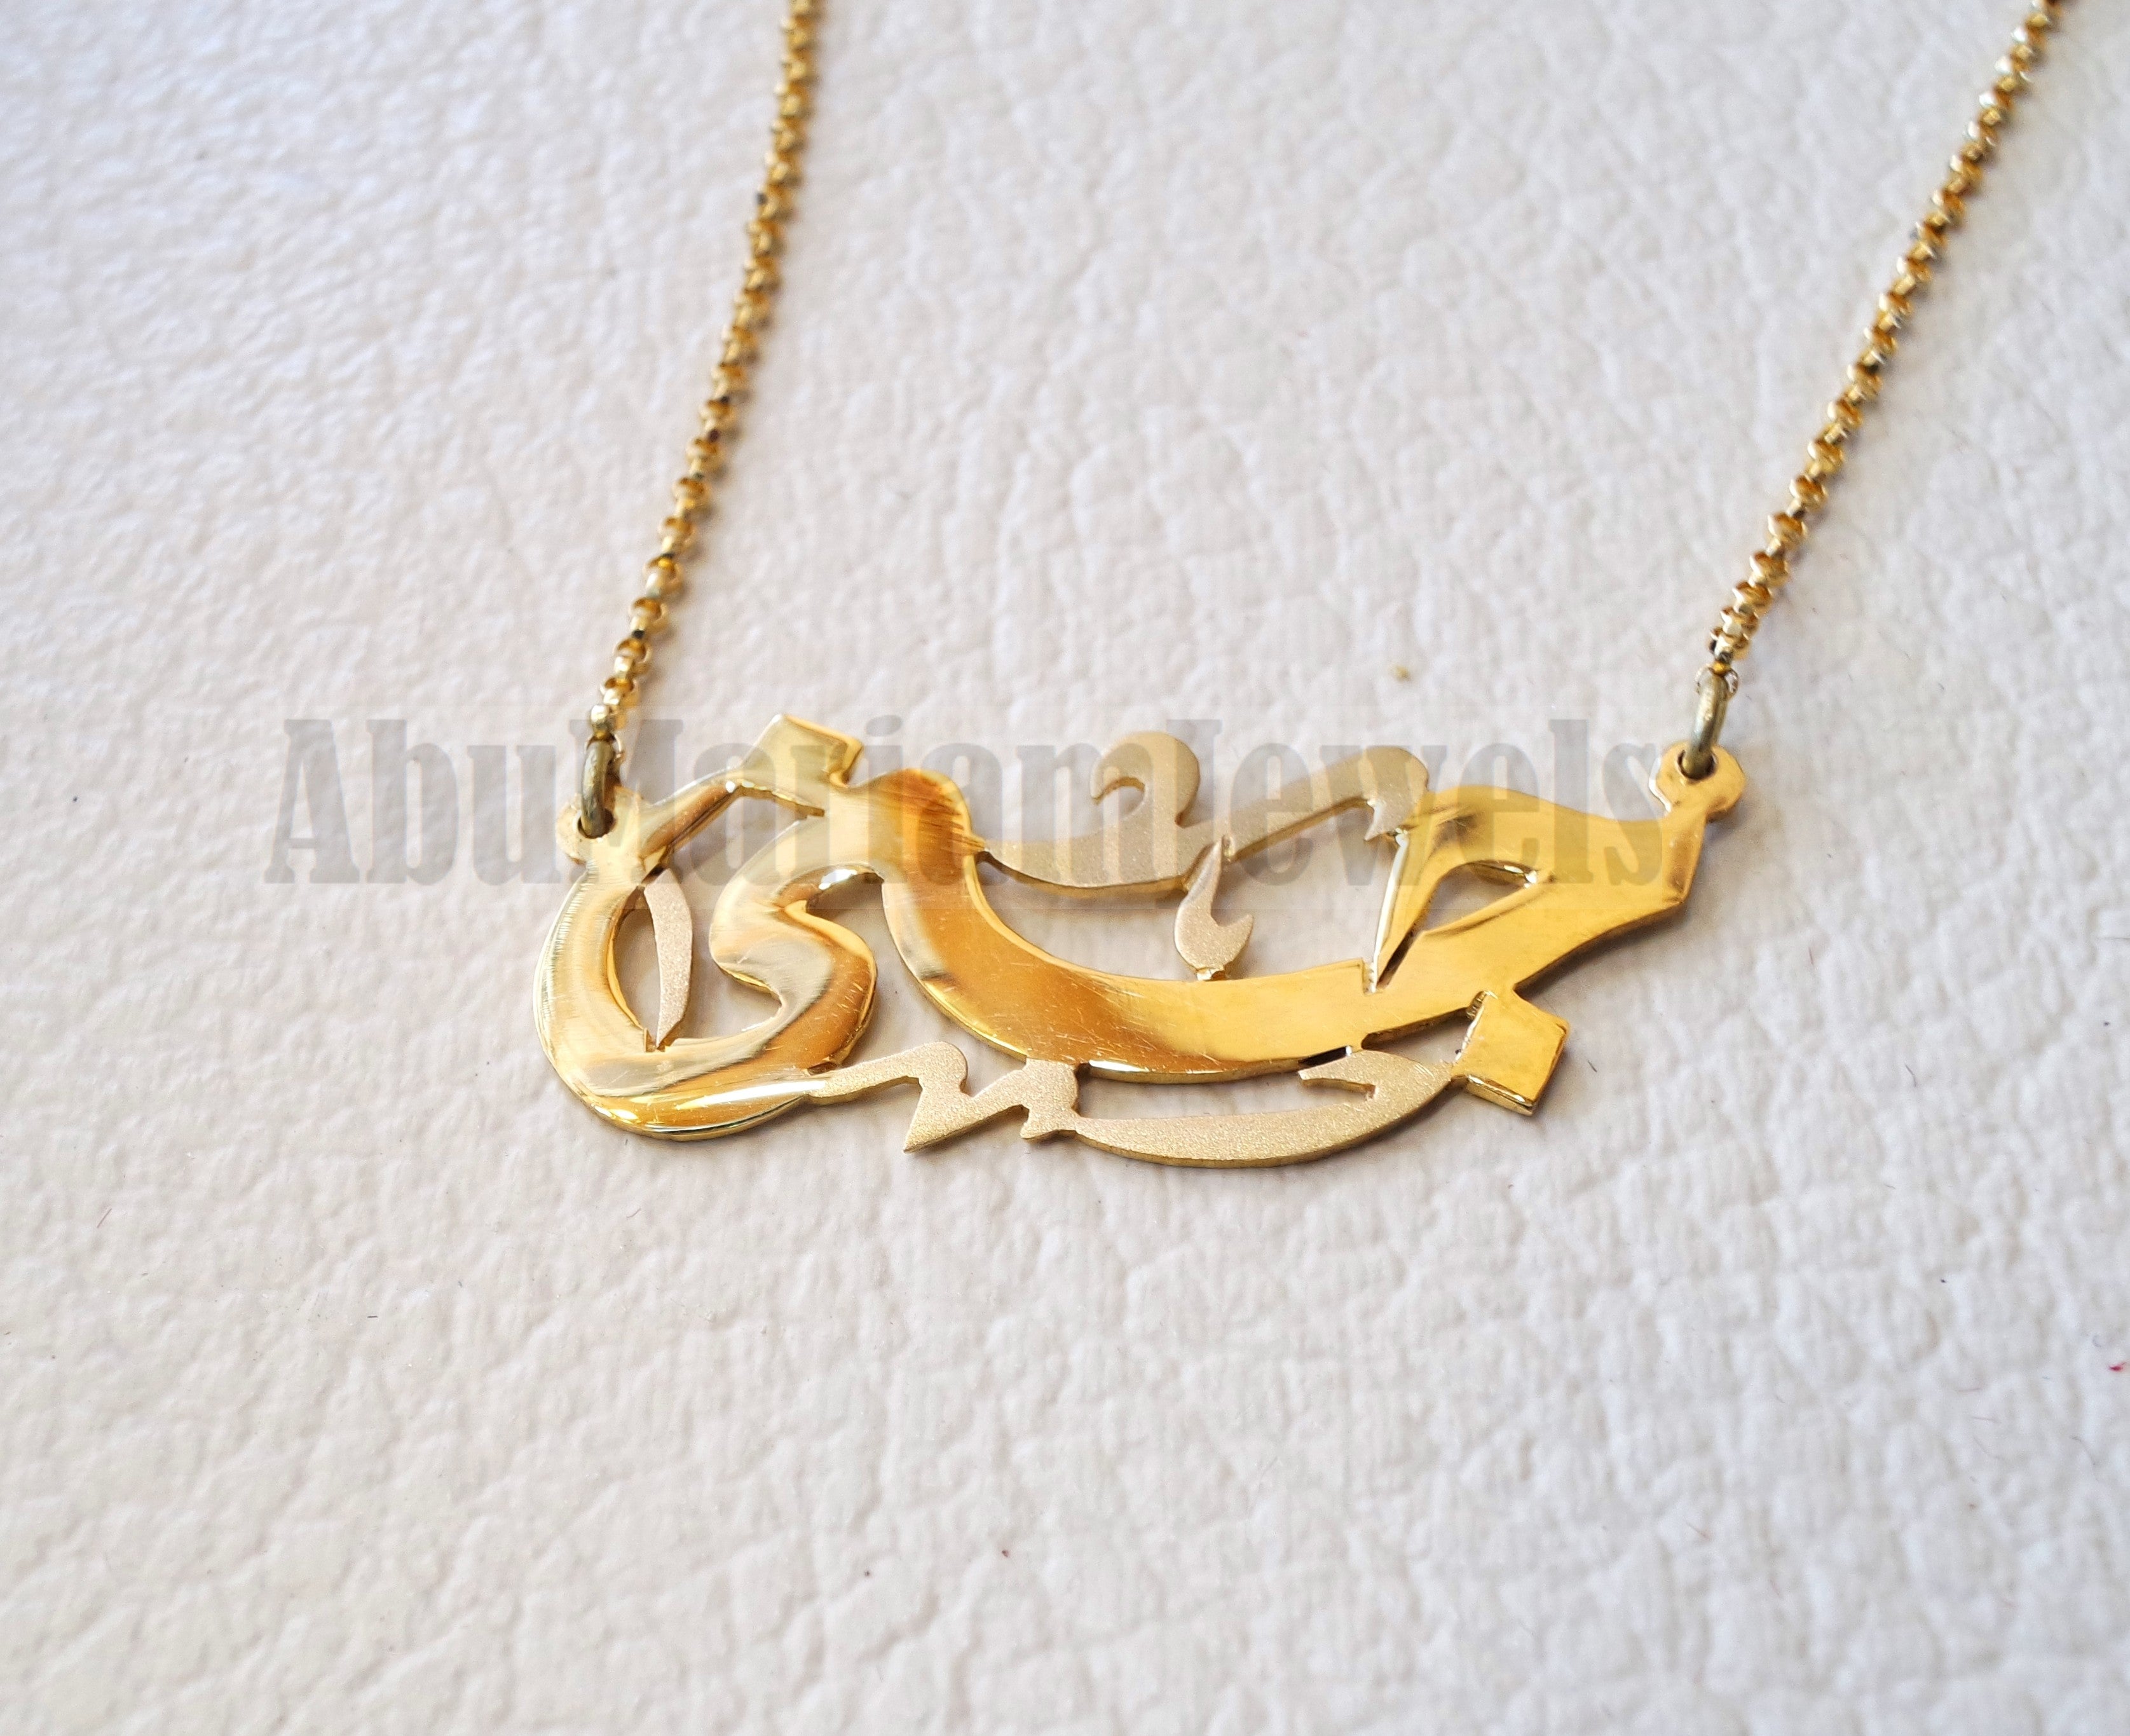 personalized customized 1 name 18 k gold arabic calligraphy pendant with chain standard , pear , rectangular or any shape fine jewelry N1014